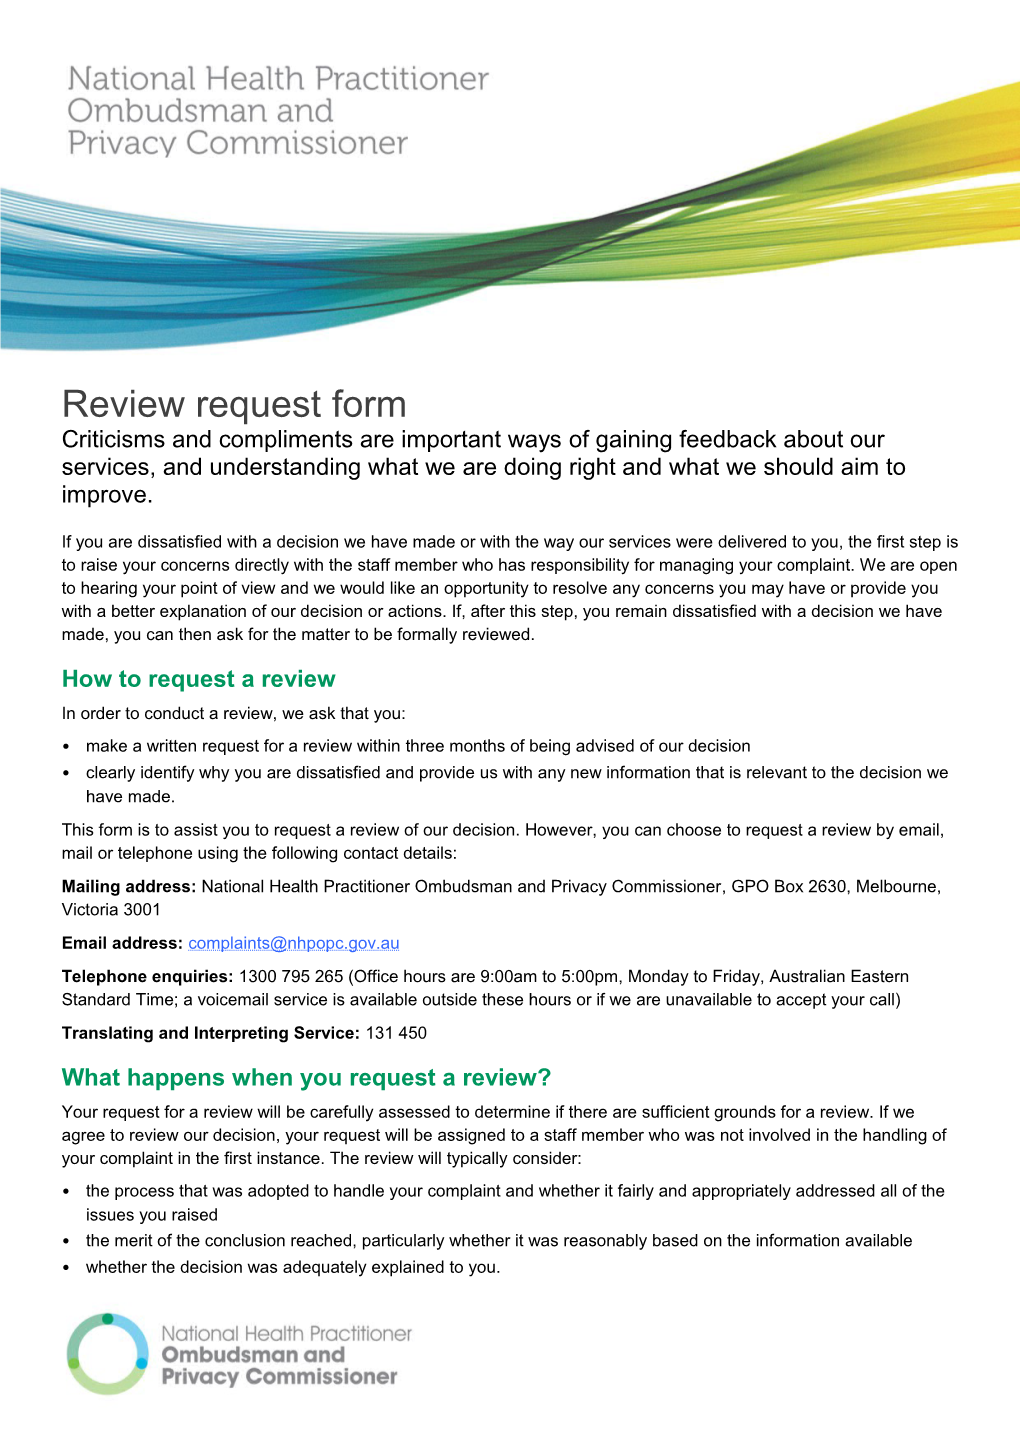 Review Request Form